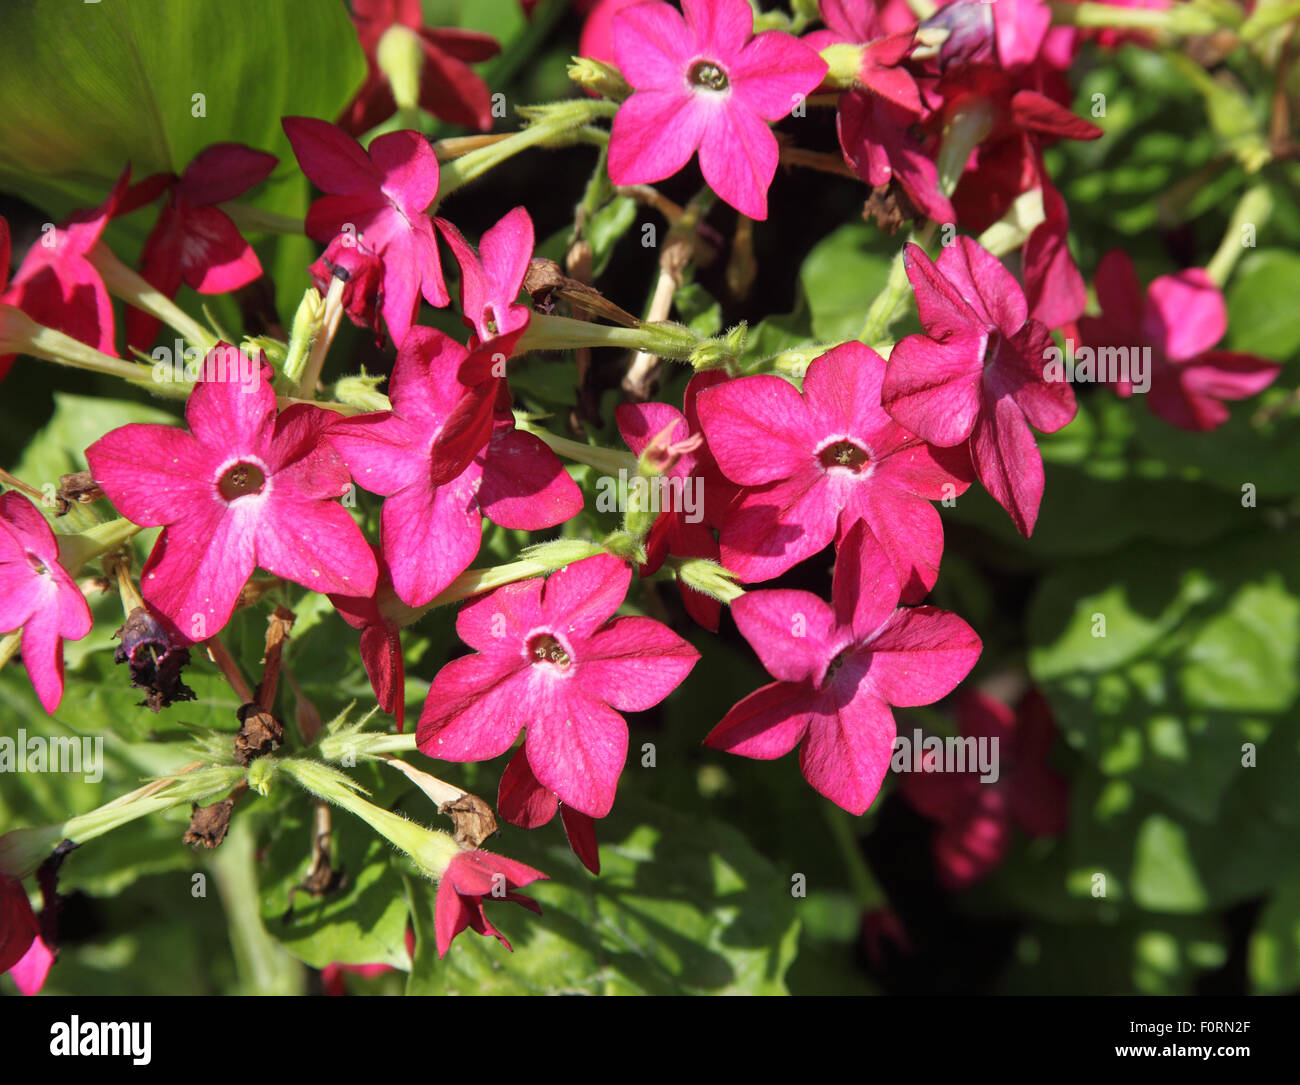 Nicotiana x sanderae 'Starship series' close up of plant in flower Stock Photo